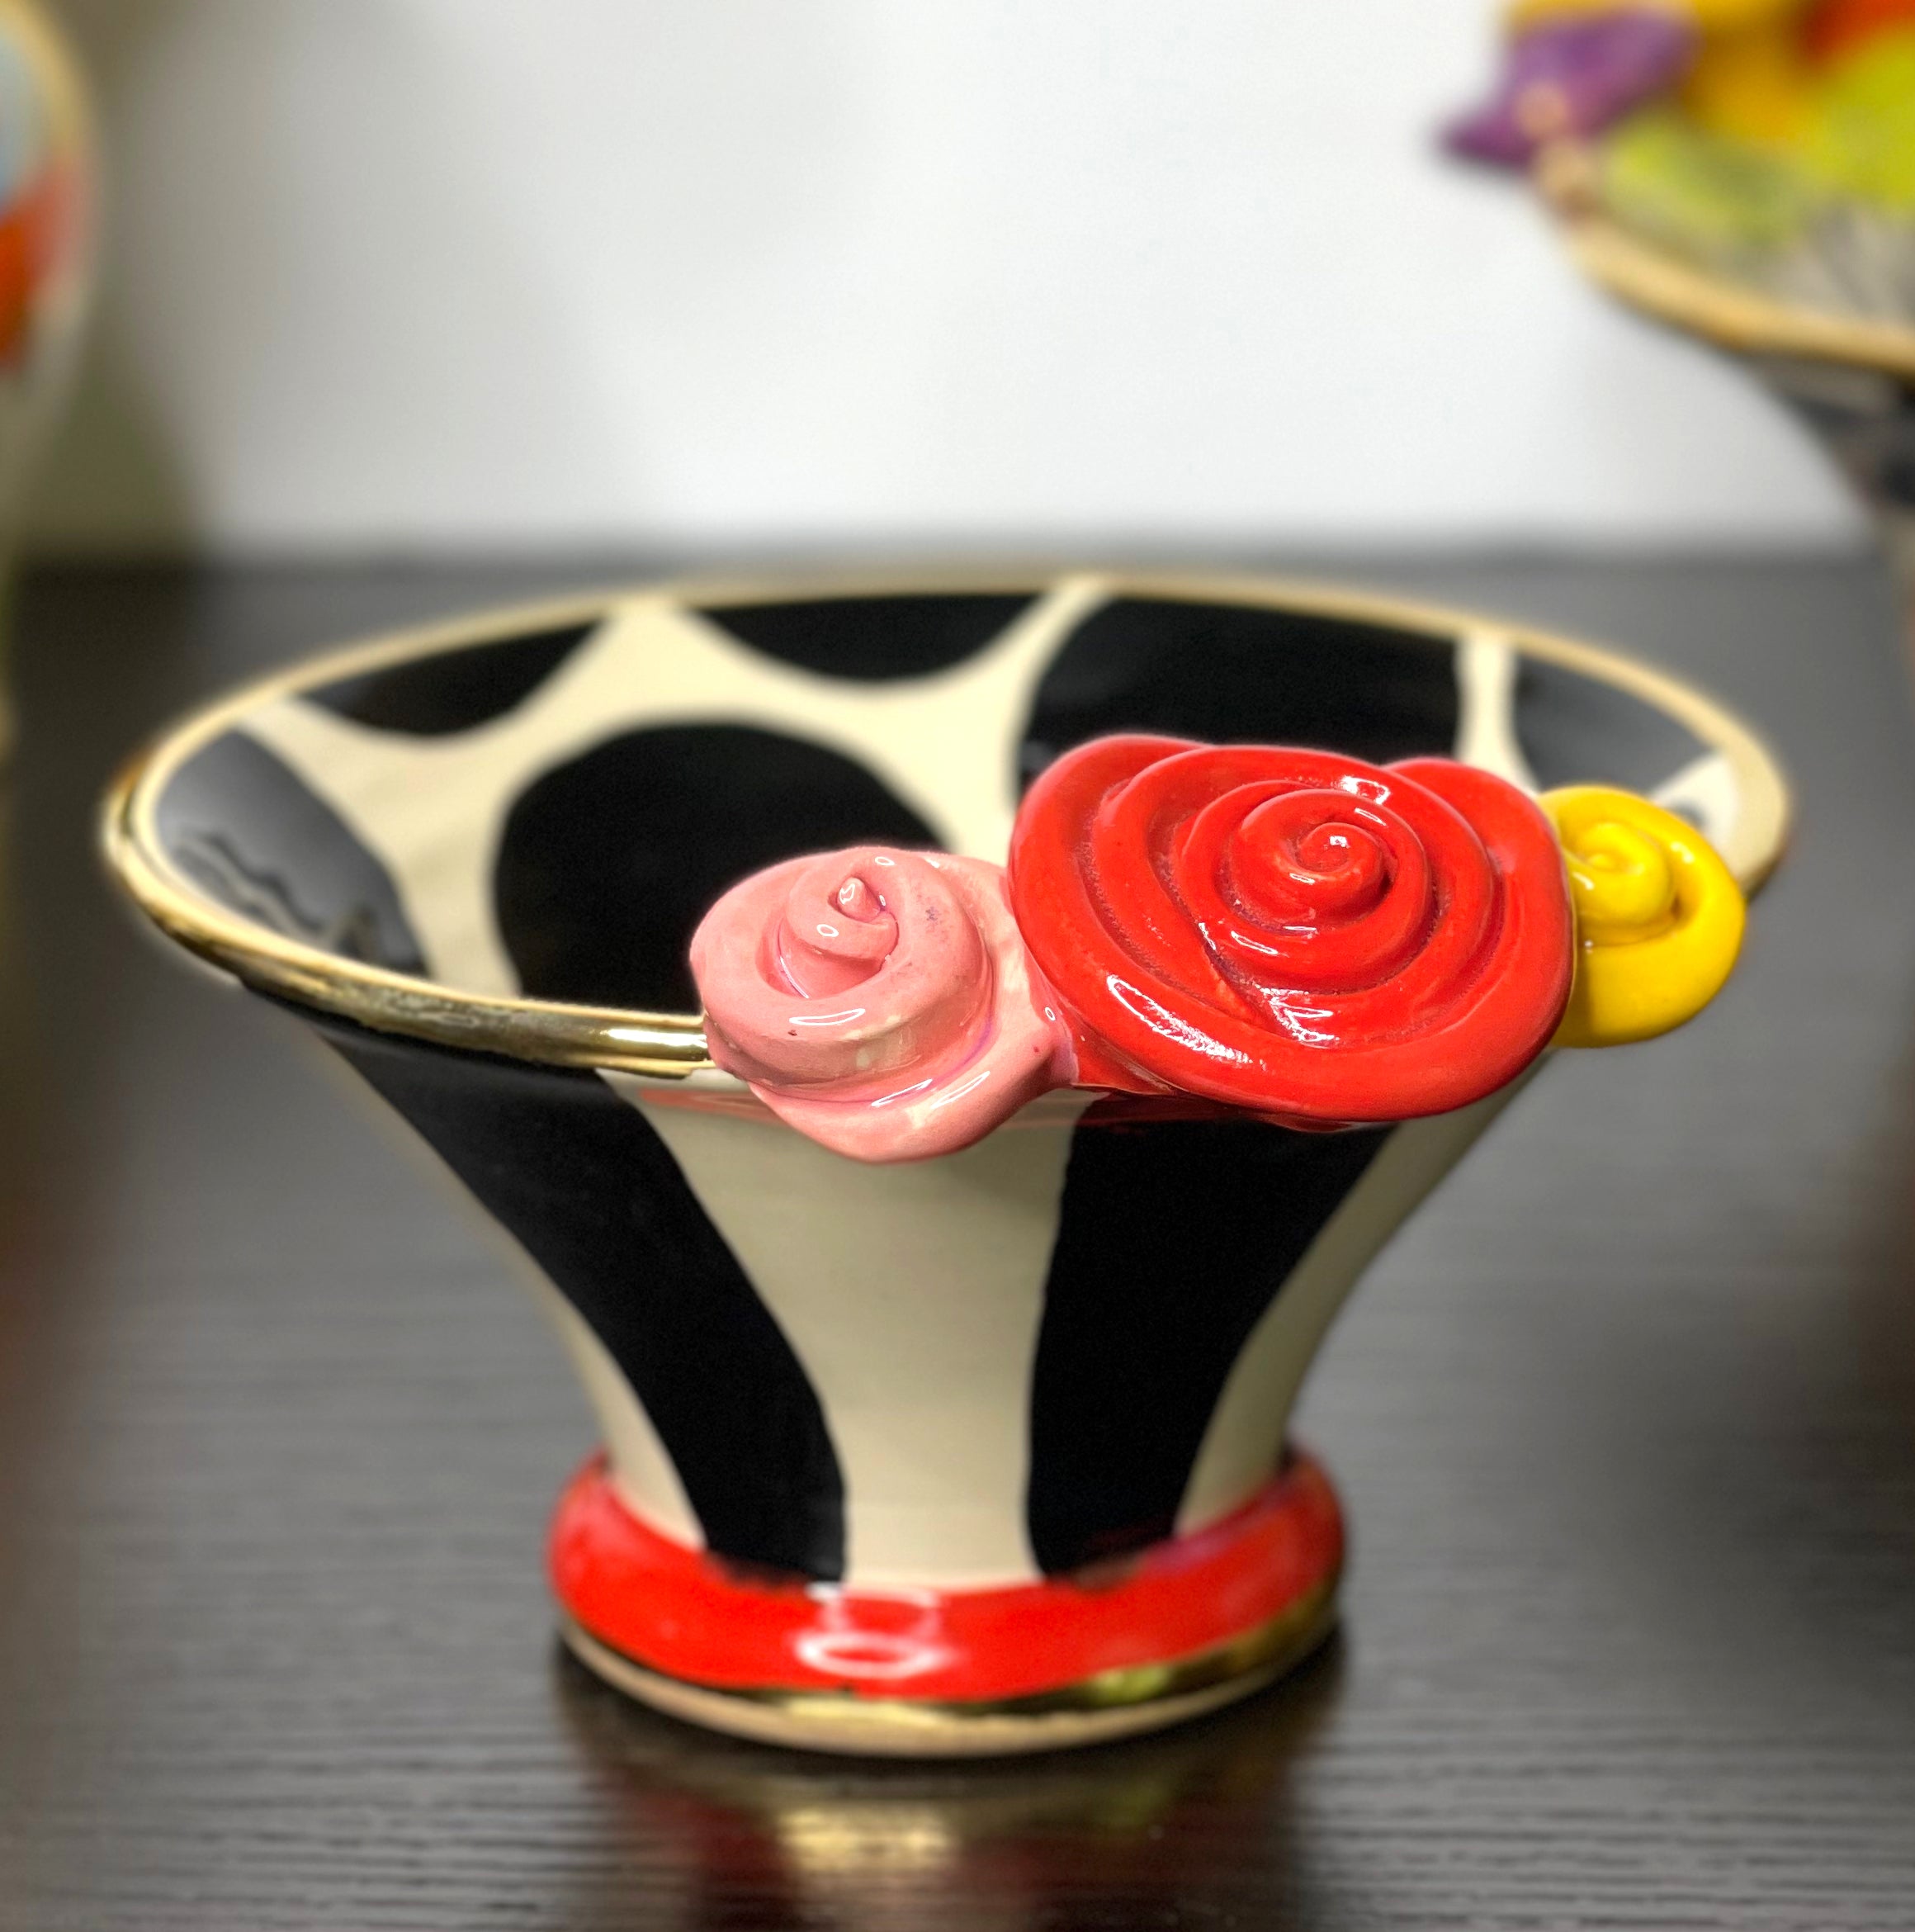 Mary Rose Young Pottery Little Rose Bowl with polka dots, stripes and colorful flowers